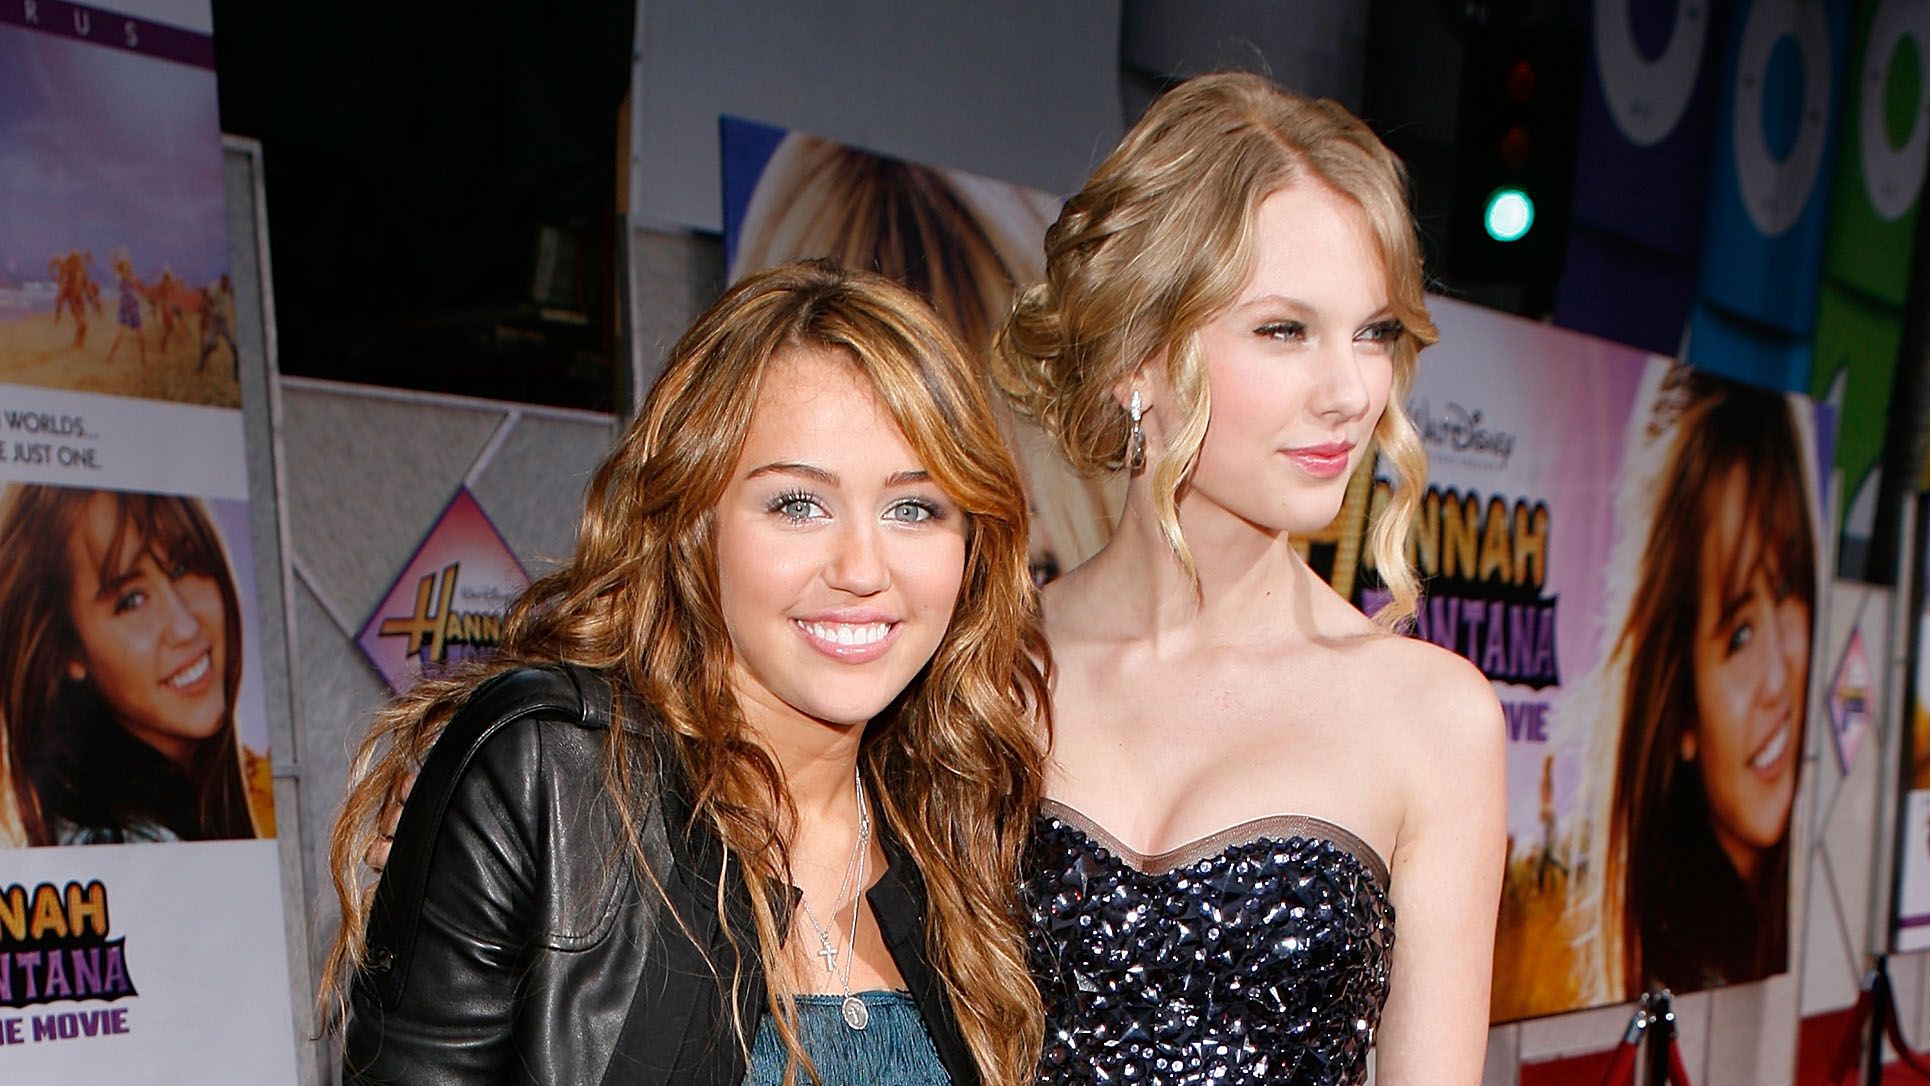 Are Taylor Swift and Miley Cyrus Friends